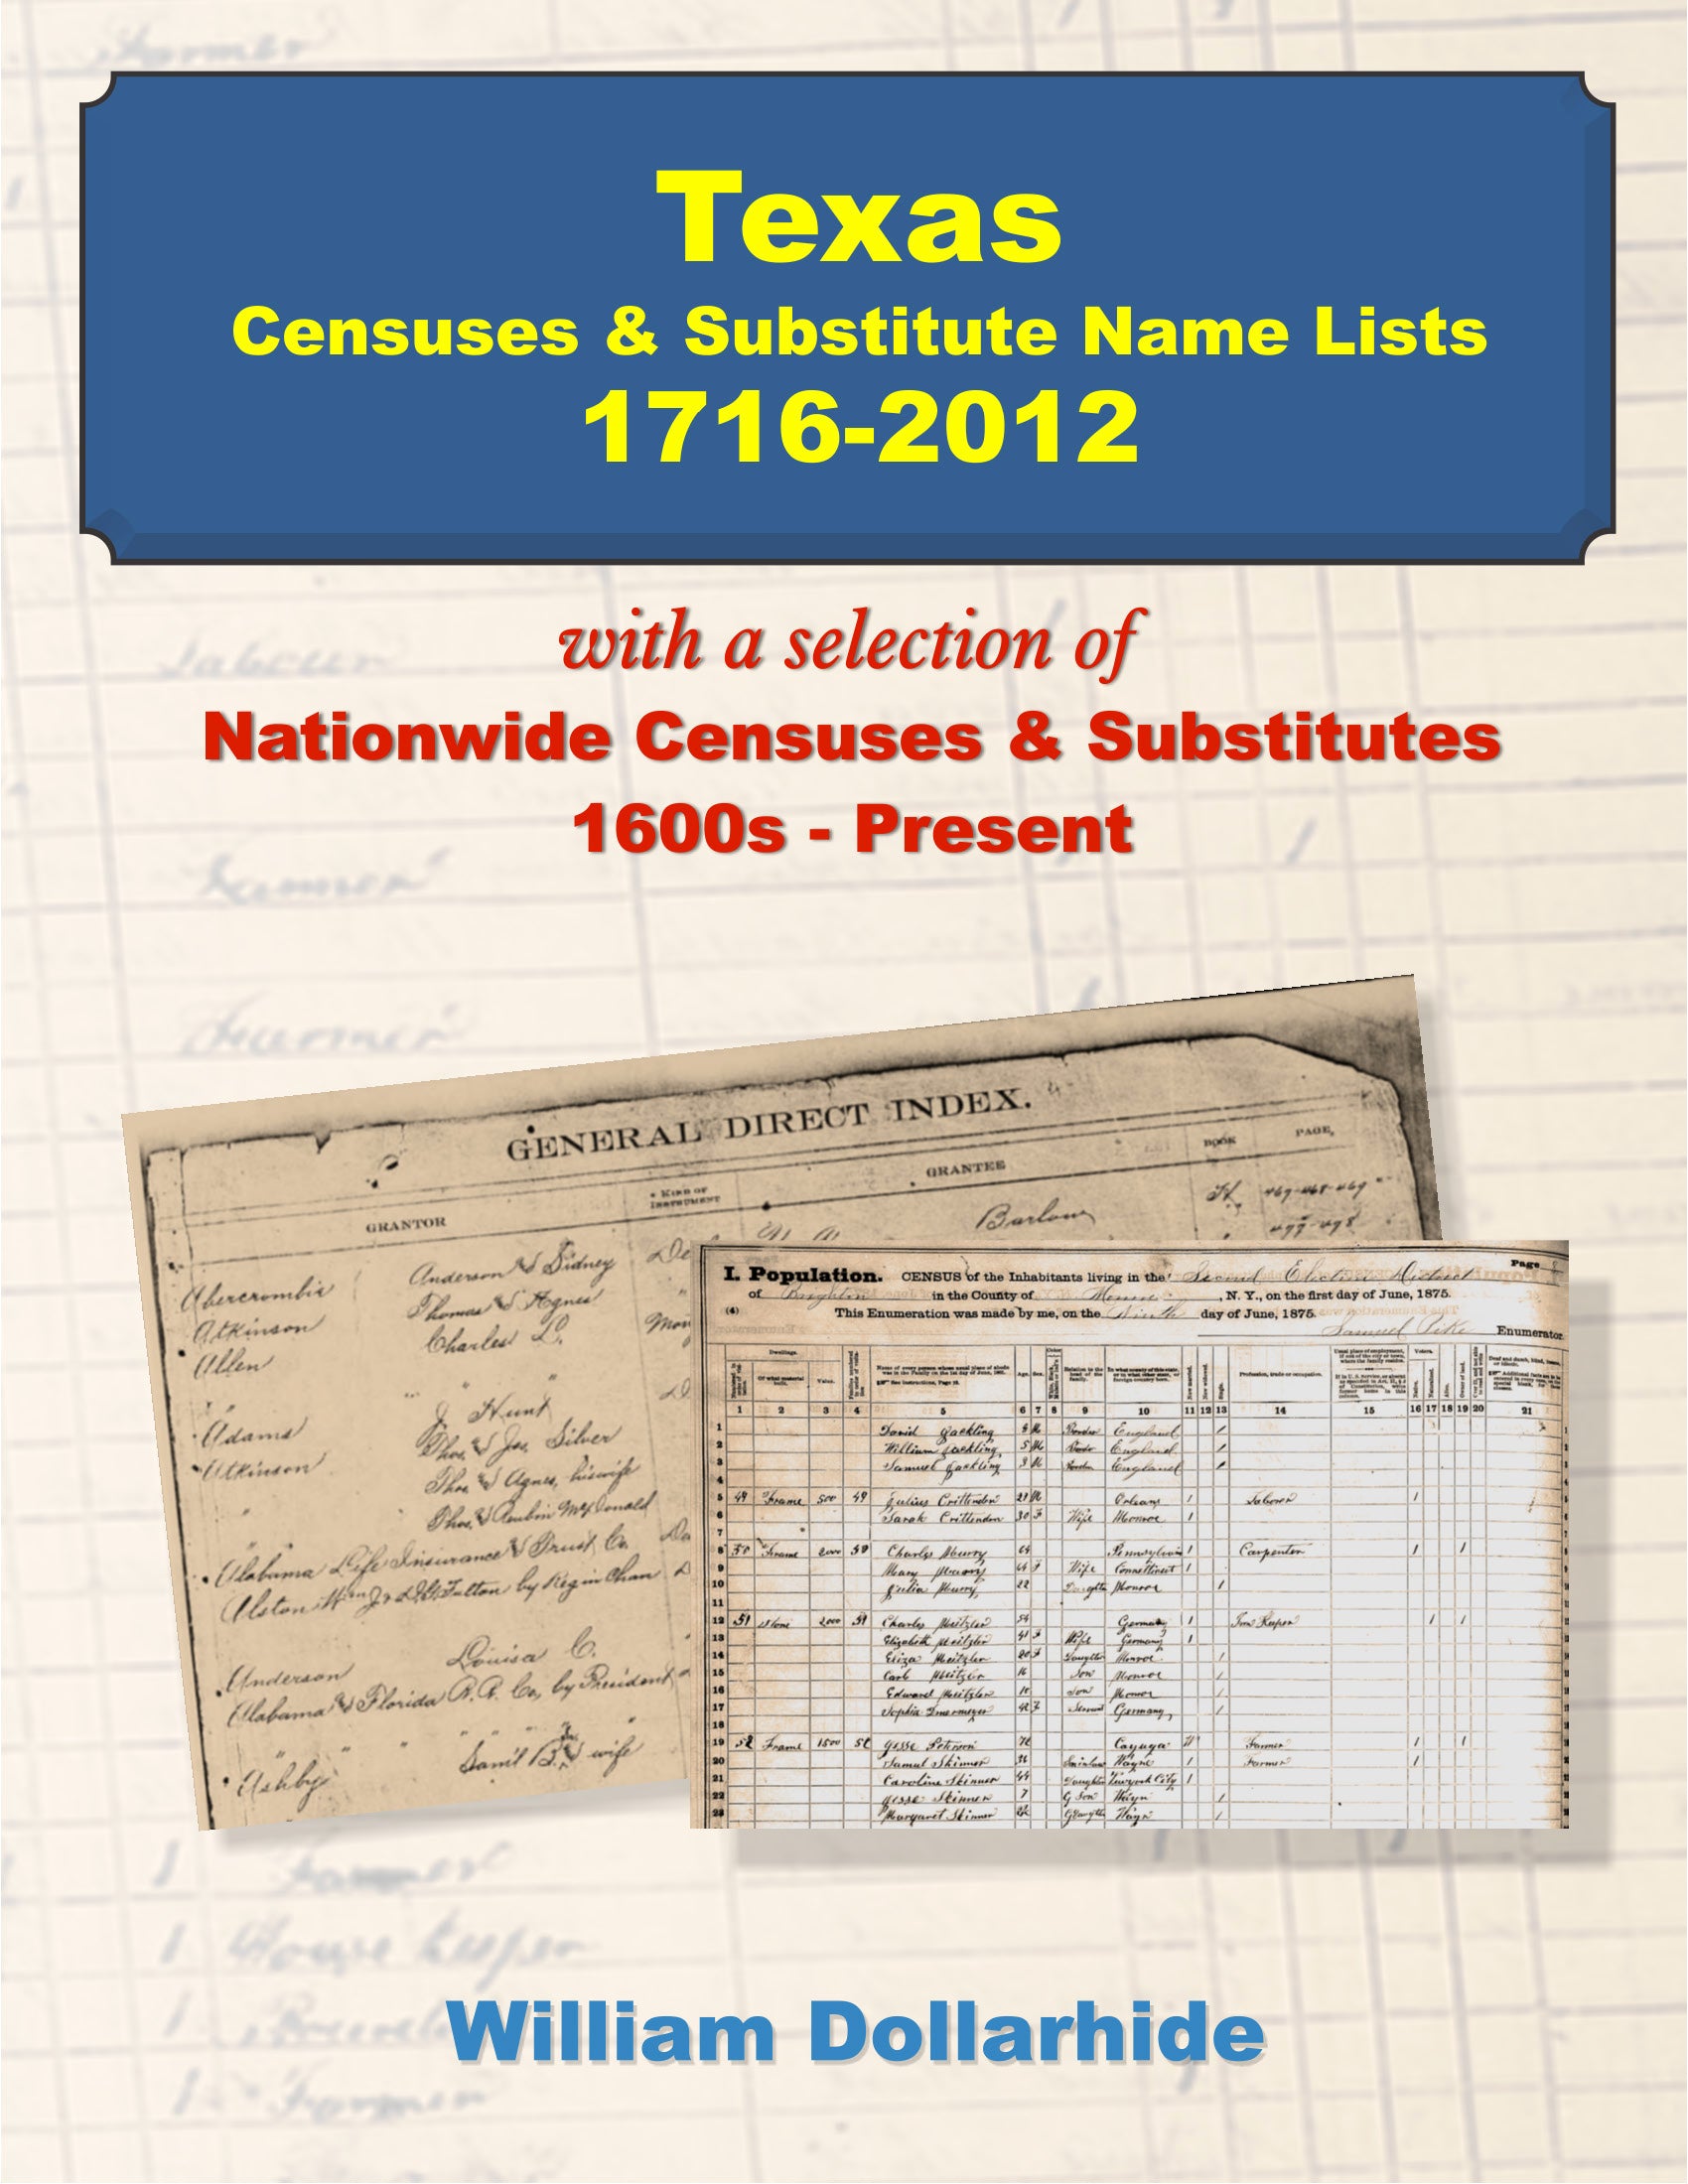 Texas Censuses & Substitute Name Lists 1716-2012 - SOFTBOUND